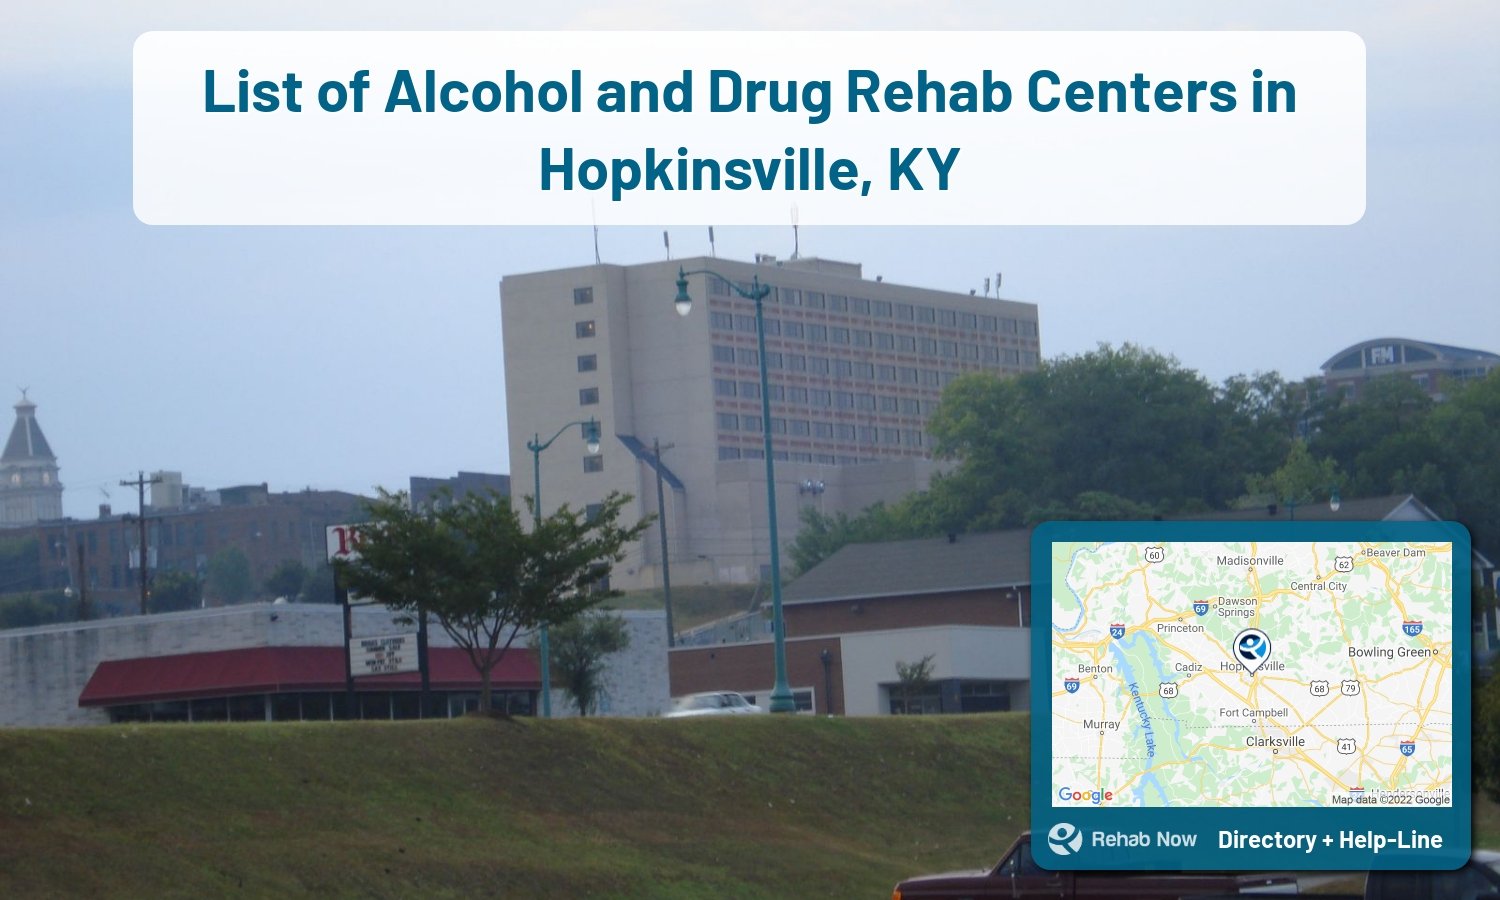 Hopkinsville, KY Treatment Centers. Find drug rehab in Hopkinsville, Kentucky, or detox and treatment programs. Get the right help now!